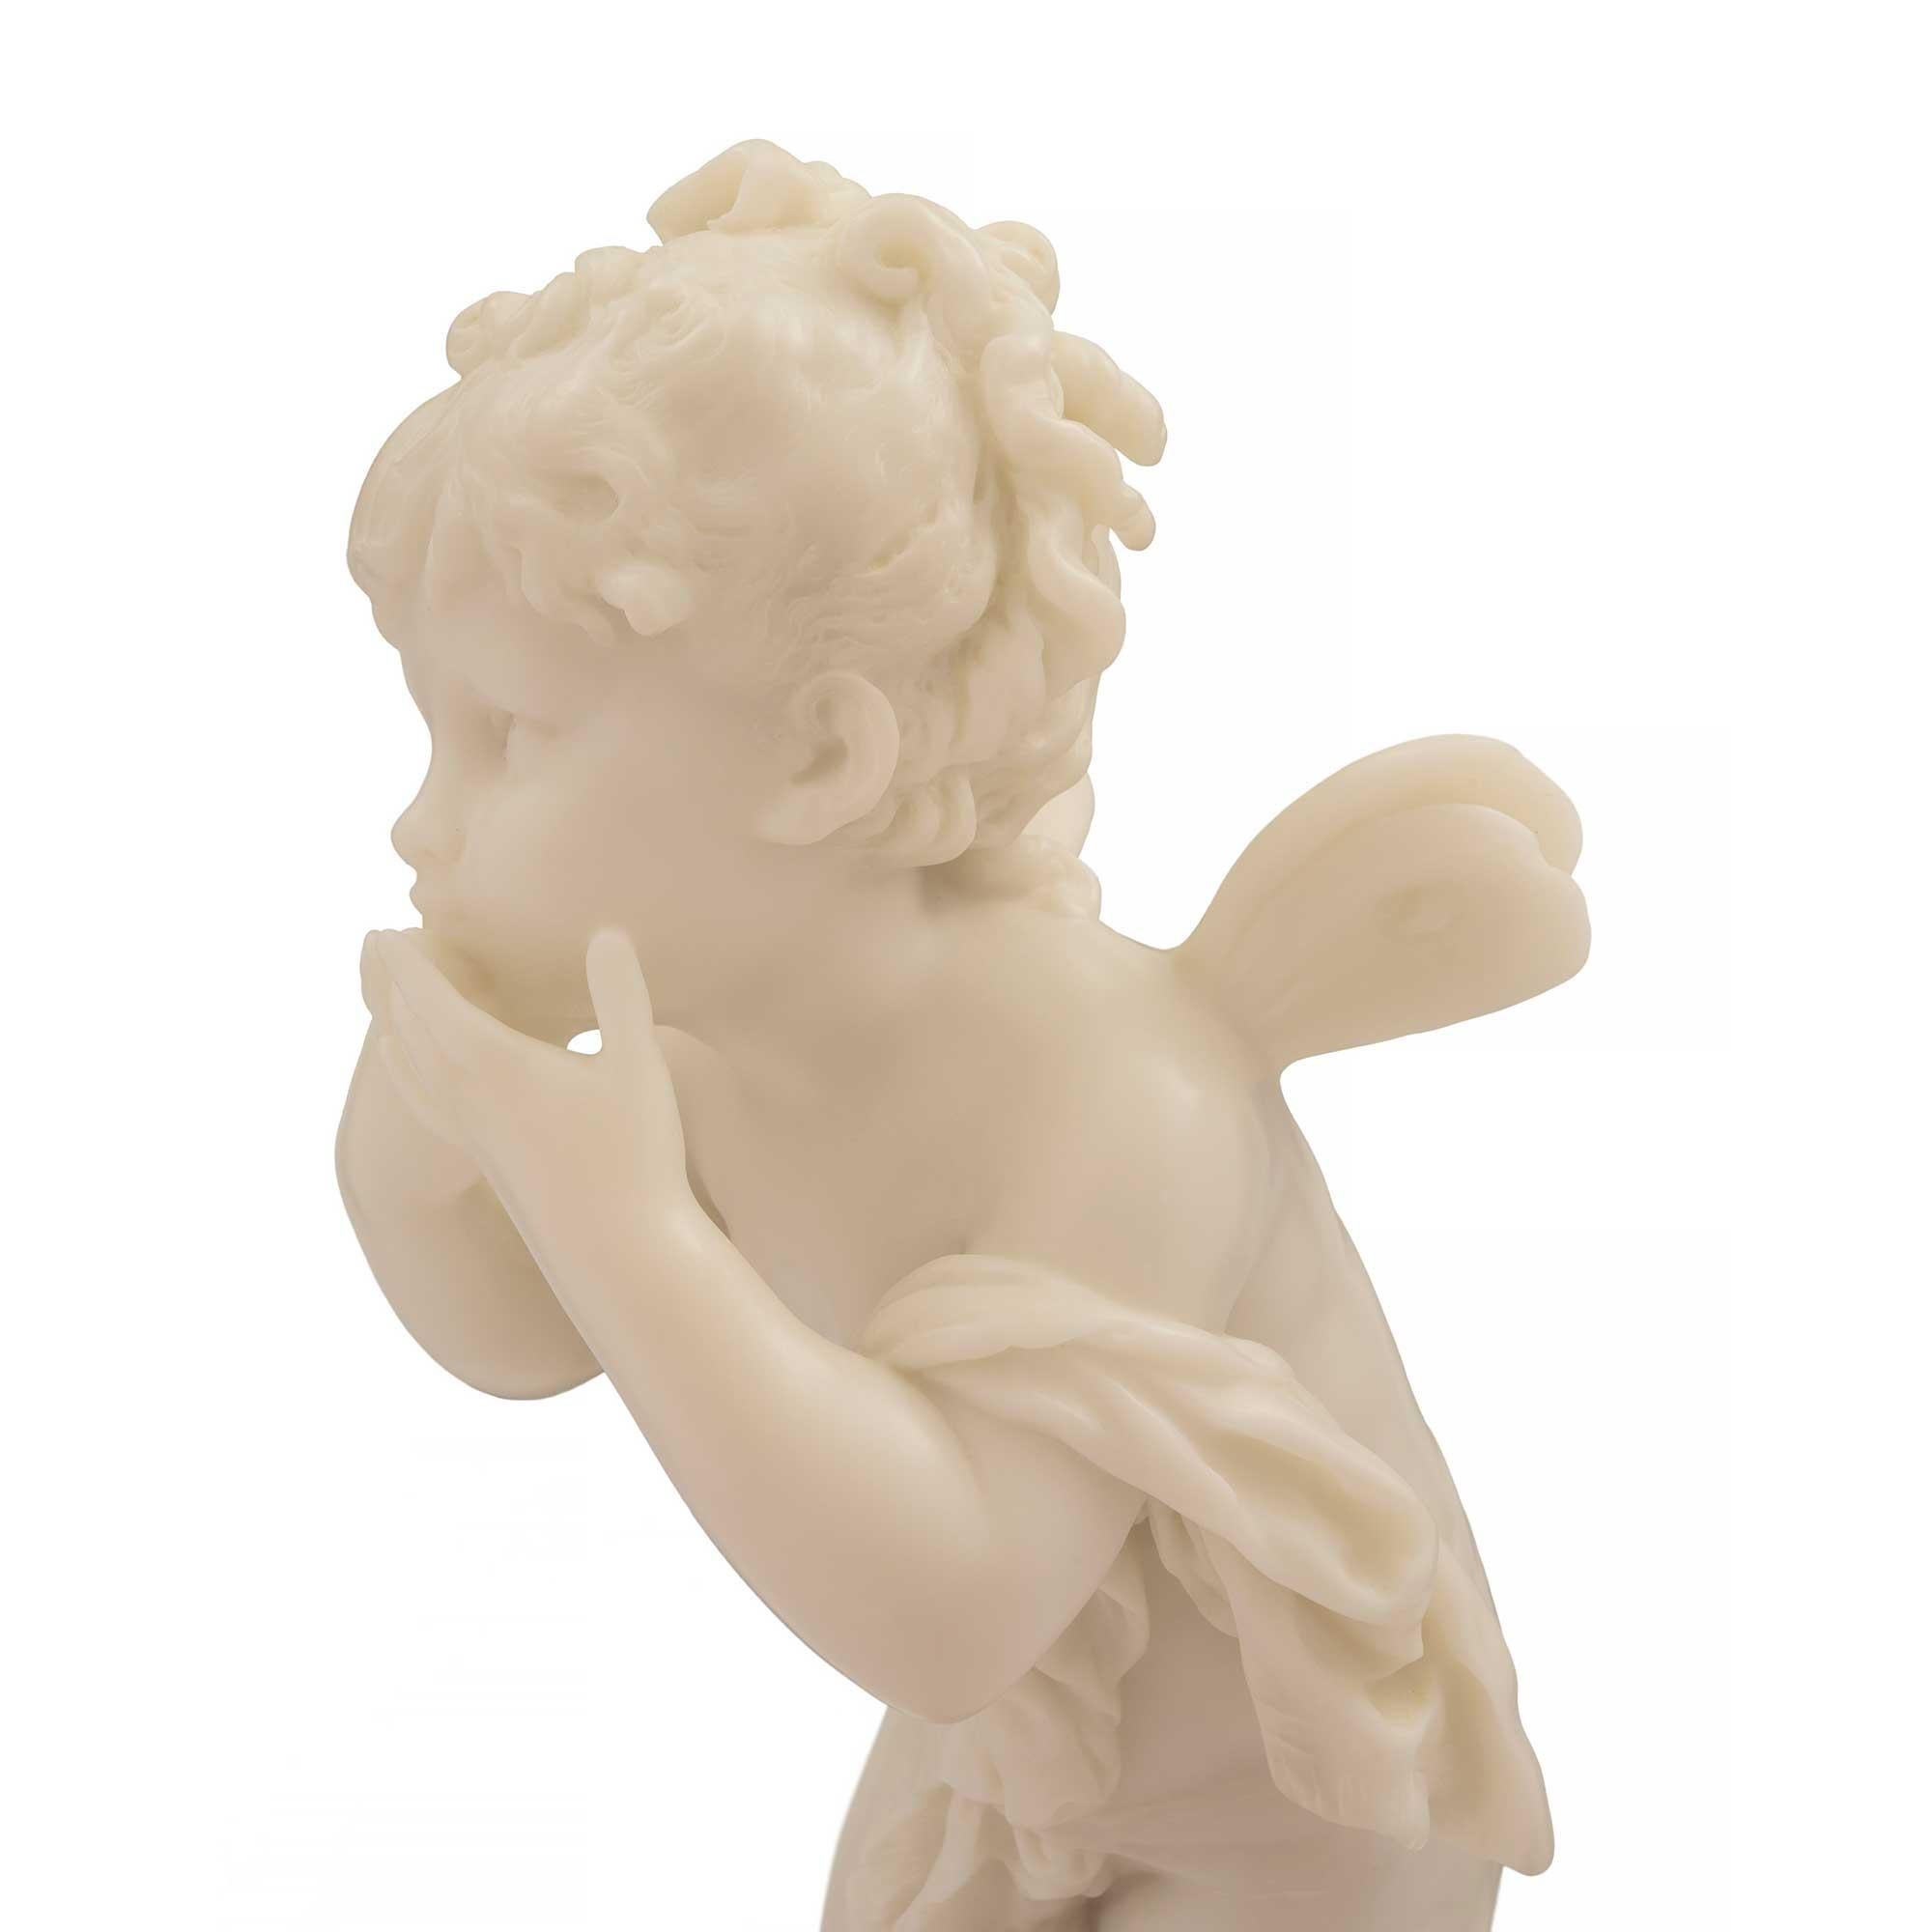 Italian Mid-19th Century White Carrara Marble Statue of Winged Girl For Sale 4